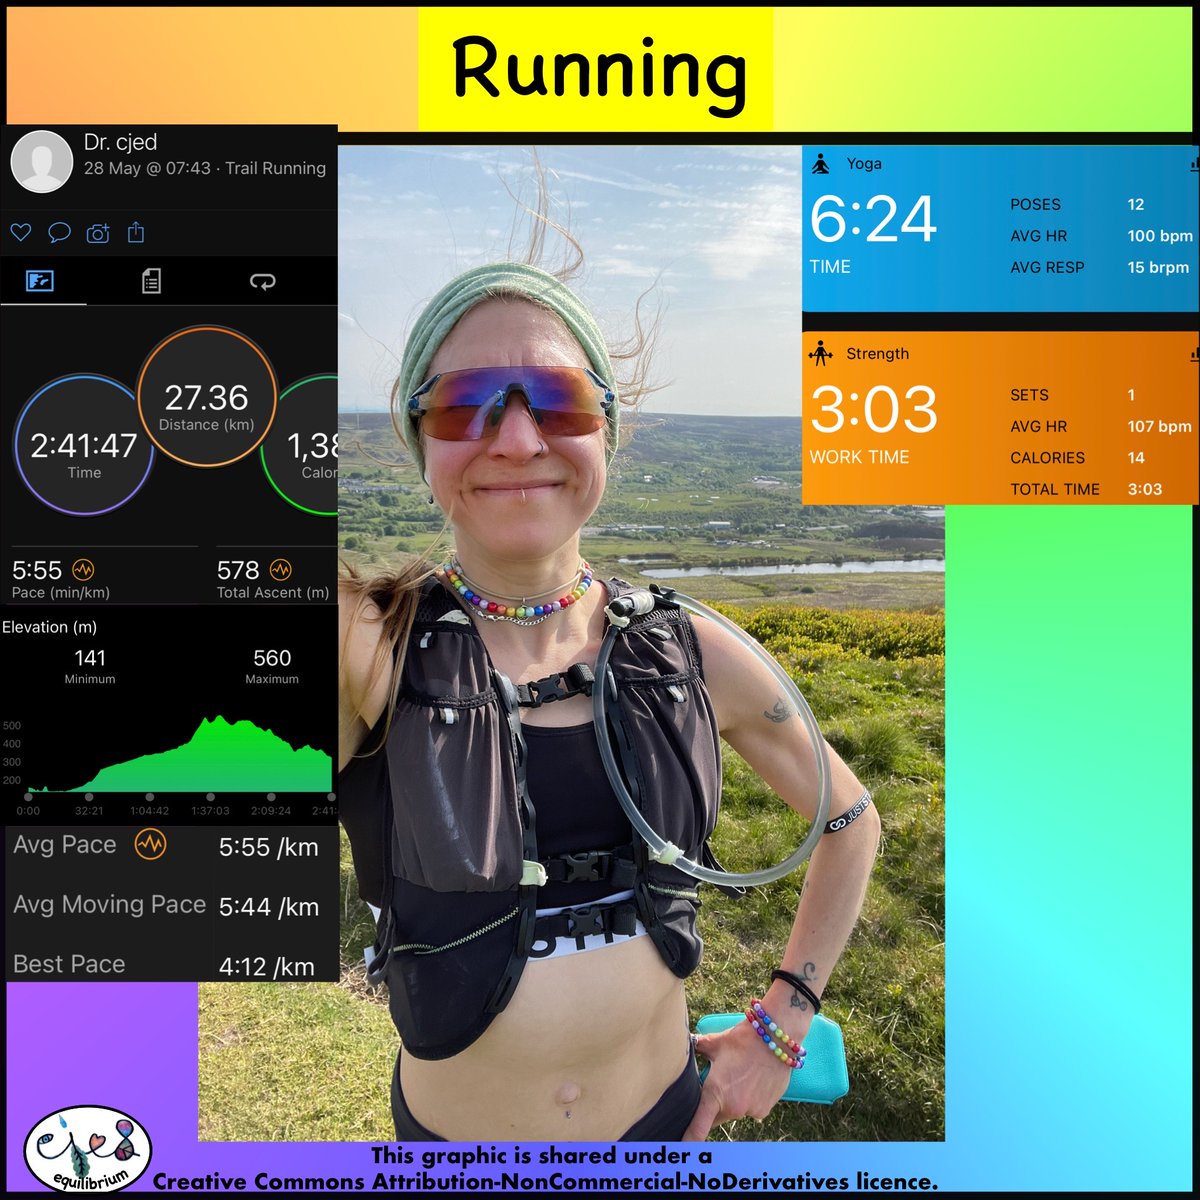 Very special #run #trailrun this am in #wales 🏴󠁧󠁢󠁷󠁬󠁳󠁿 more elevation than i’m used to, ❤️ it. This is what I was born to do! #runday #runners #running #trailrunning #garminfitness #garminrunning #strength #flexibility #yoga #consistencyiskey #personaltrainer #wfpb #plantbasedliving